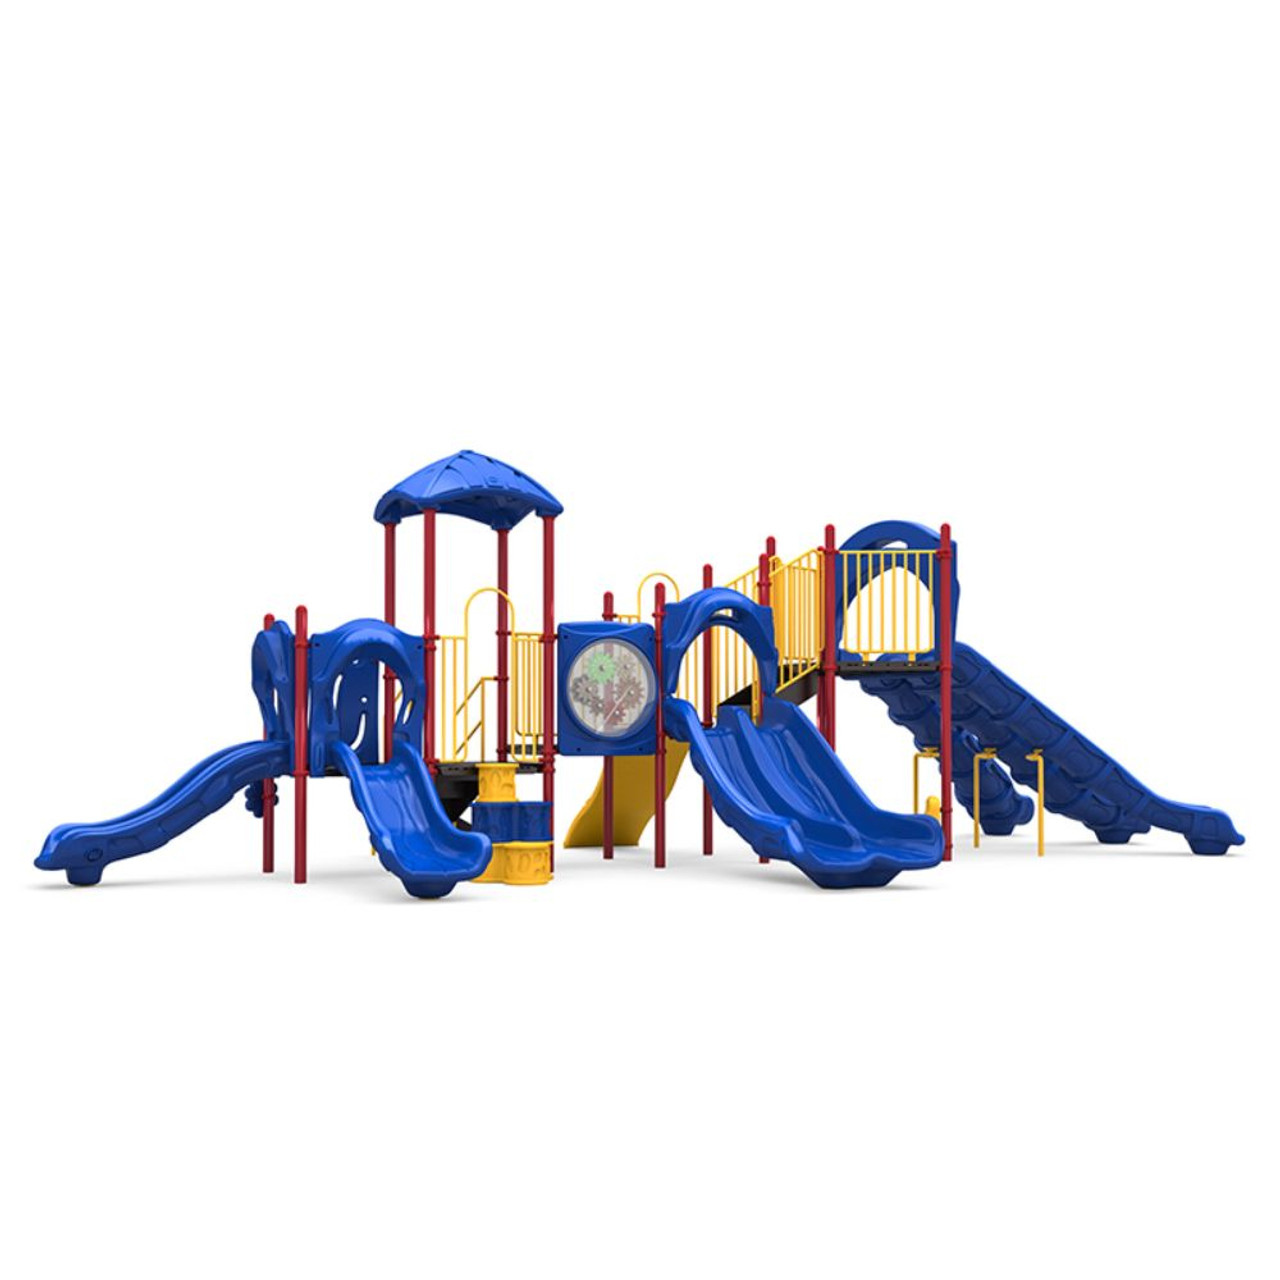 Falcon Ridge Playset - primary - front - leaf roof